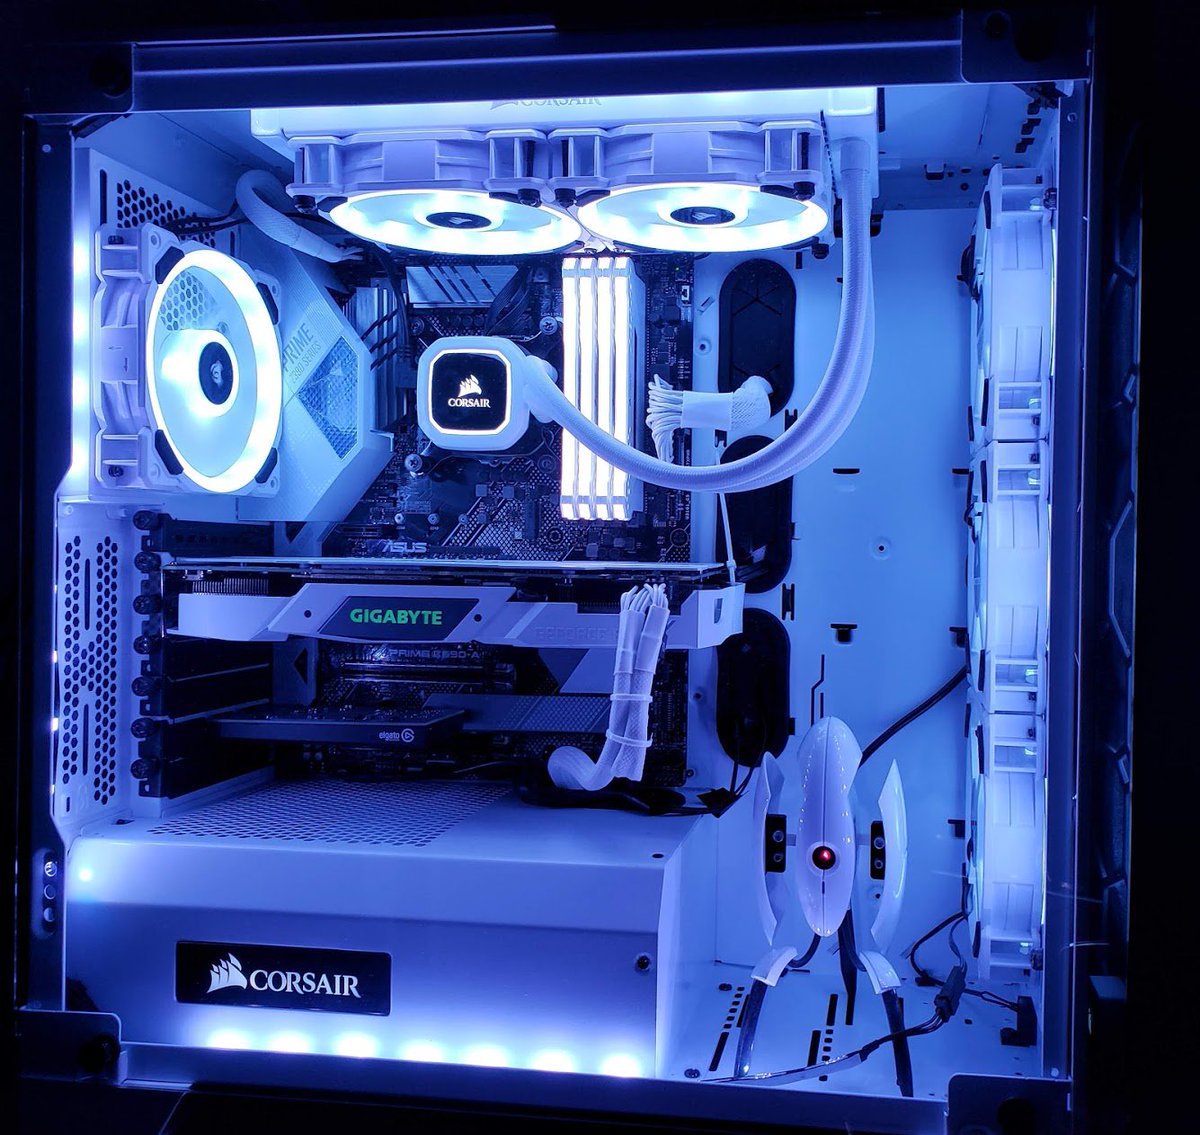 Twitter 上的CORSAIR："When your awesome build also includes a good security system. 😉 570X Build by: u/crazyhalo from https://t.co/31jDHTzGng" / Twitter